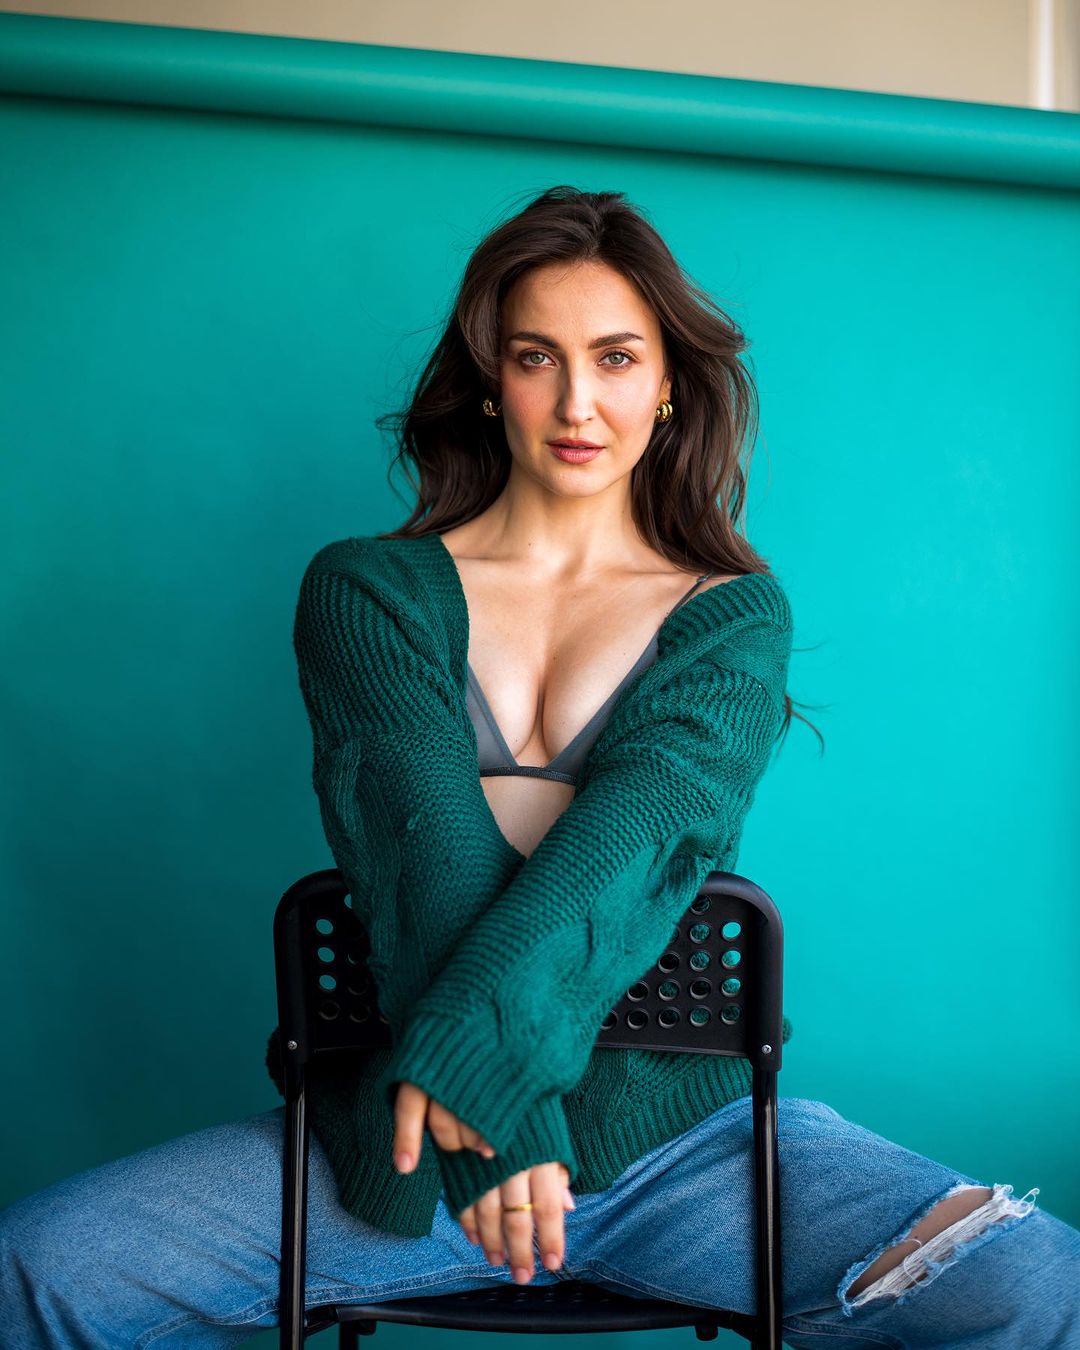 HINDI ACTRESS ELLI AVRRAM IMAGES IN GREEN TOP BLUE JEANS 7